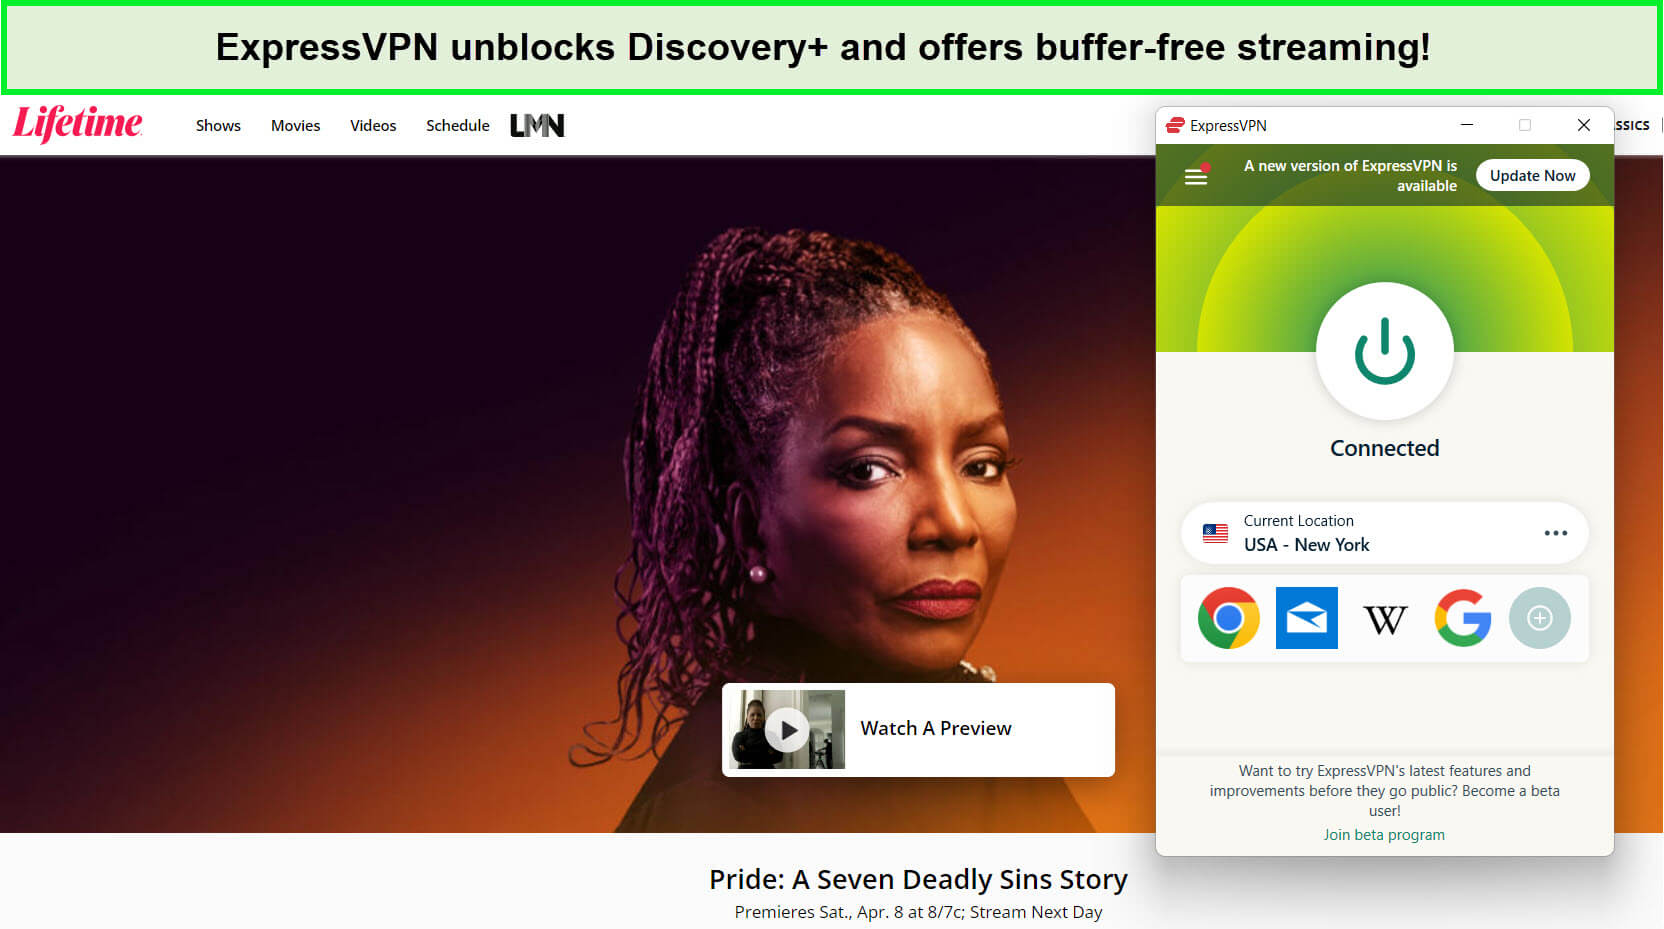 expressvpn-unblocks-pride-a-seven-deadly-sins-story-on-discovery-plus